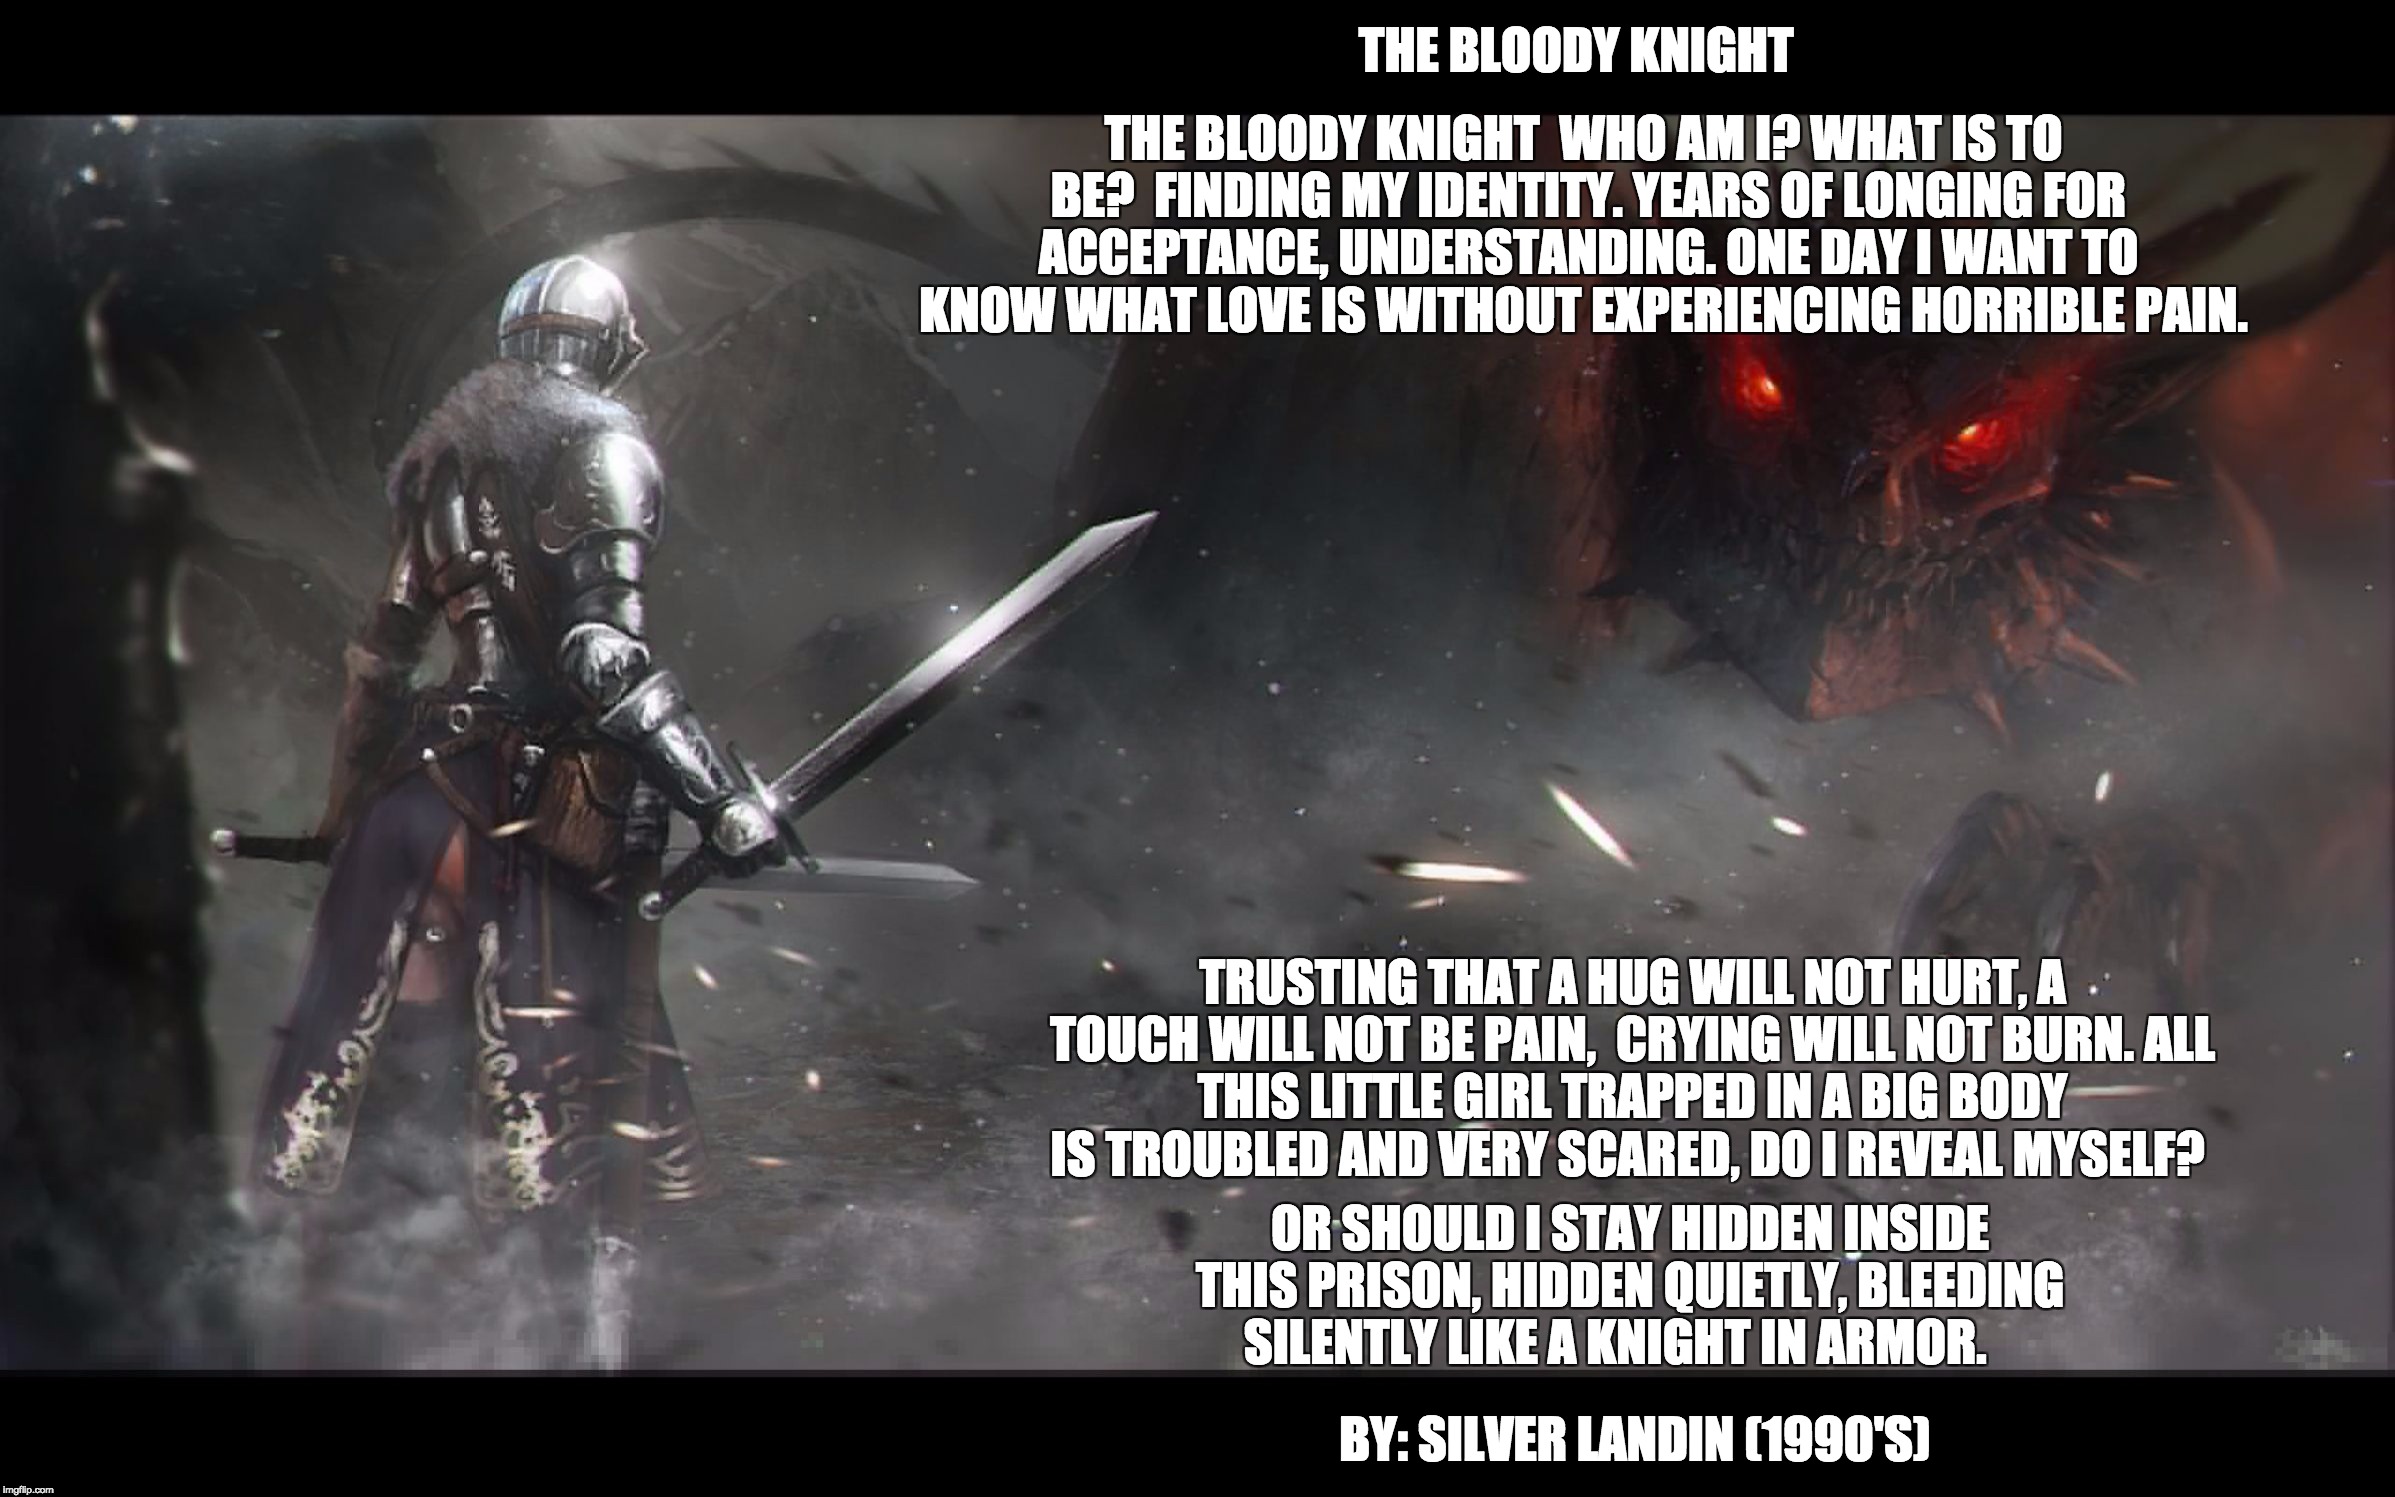 The Bloody Knight
 | THE BLOODY KNIGHT

WHO AM I? WHAT IS TO BE?

FINDING MY IDENTITY.
YEARS OF LONGING FOR ACCEPTANCE, UNDERSTANDING.
ONE DAY I WANT TO KNOW WHAT LOVE IS WITHOUT EXPERIENCING HORRIBLE PAIN. THE BLOODY KNIGHT; TRUSTING THAT A HUG WILL NOT HURT,
A TOUCH WILL NOT BE PAIN, 
CRYING WILL NOT BURN.
ALL THIS LITTLE GIRL TRAPPED IN A BIG BODY IS TROUBLED AND VERY SCARED,
DO I REVEAL MYSELF? OR SHOULD I STAY HIDDEN INSIDE THIS PRISON,
HIDDEN QUIETLY, BLEEDING SILENTLY LIKE A KNIGHT IN ARMOR. BY: SILVER LANDIN (1990'S) | image tagged in knight fighting dragon,poetry,child abuse | made w/ Imgflip meme maker